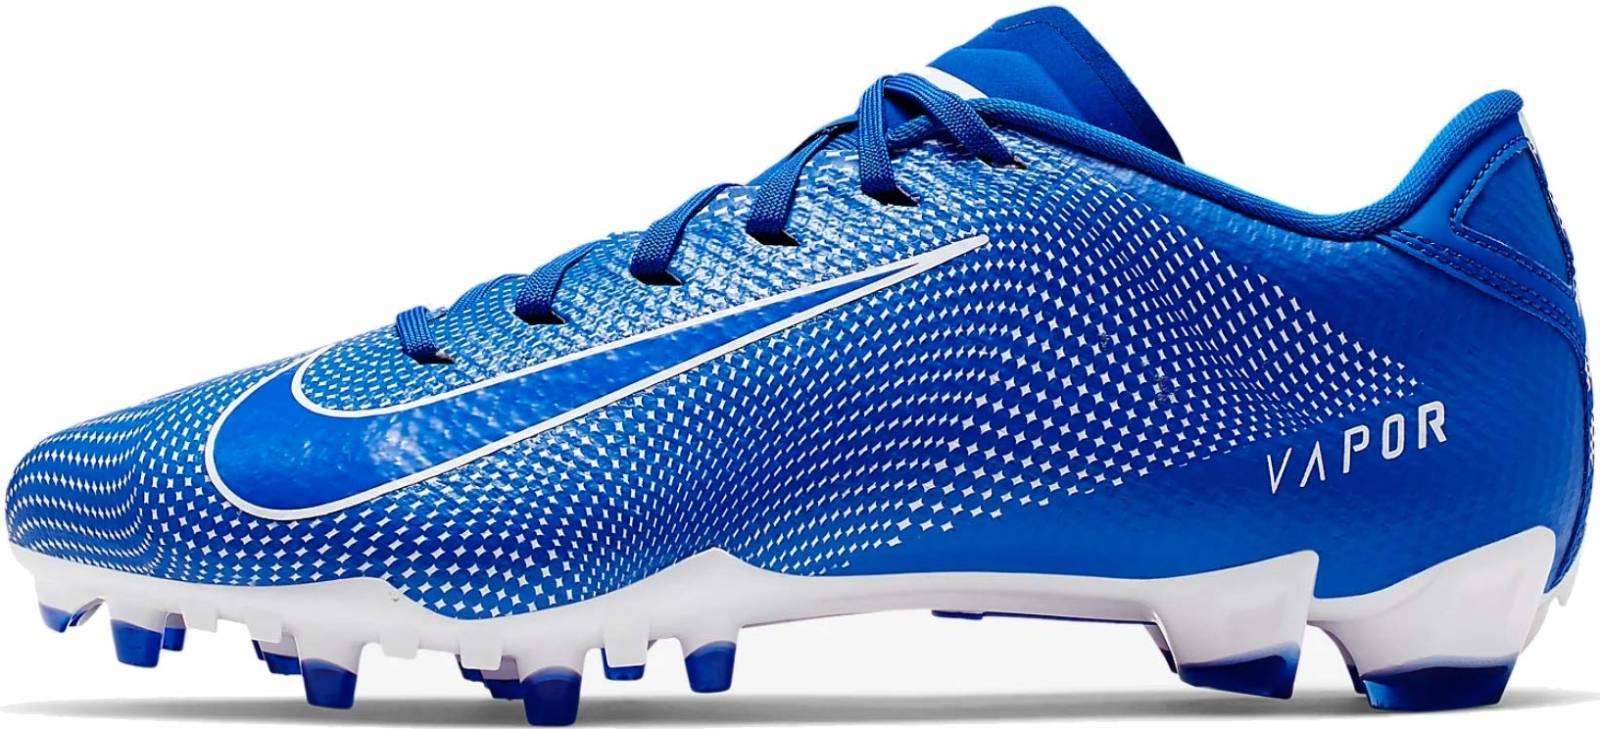 blue and white nike football cleats